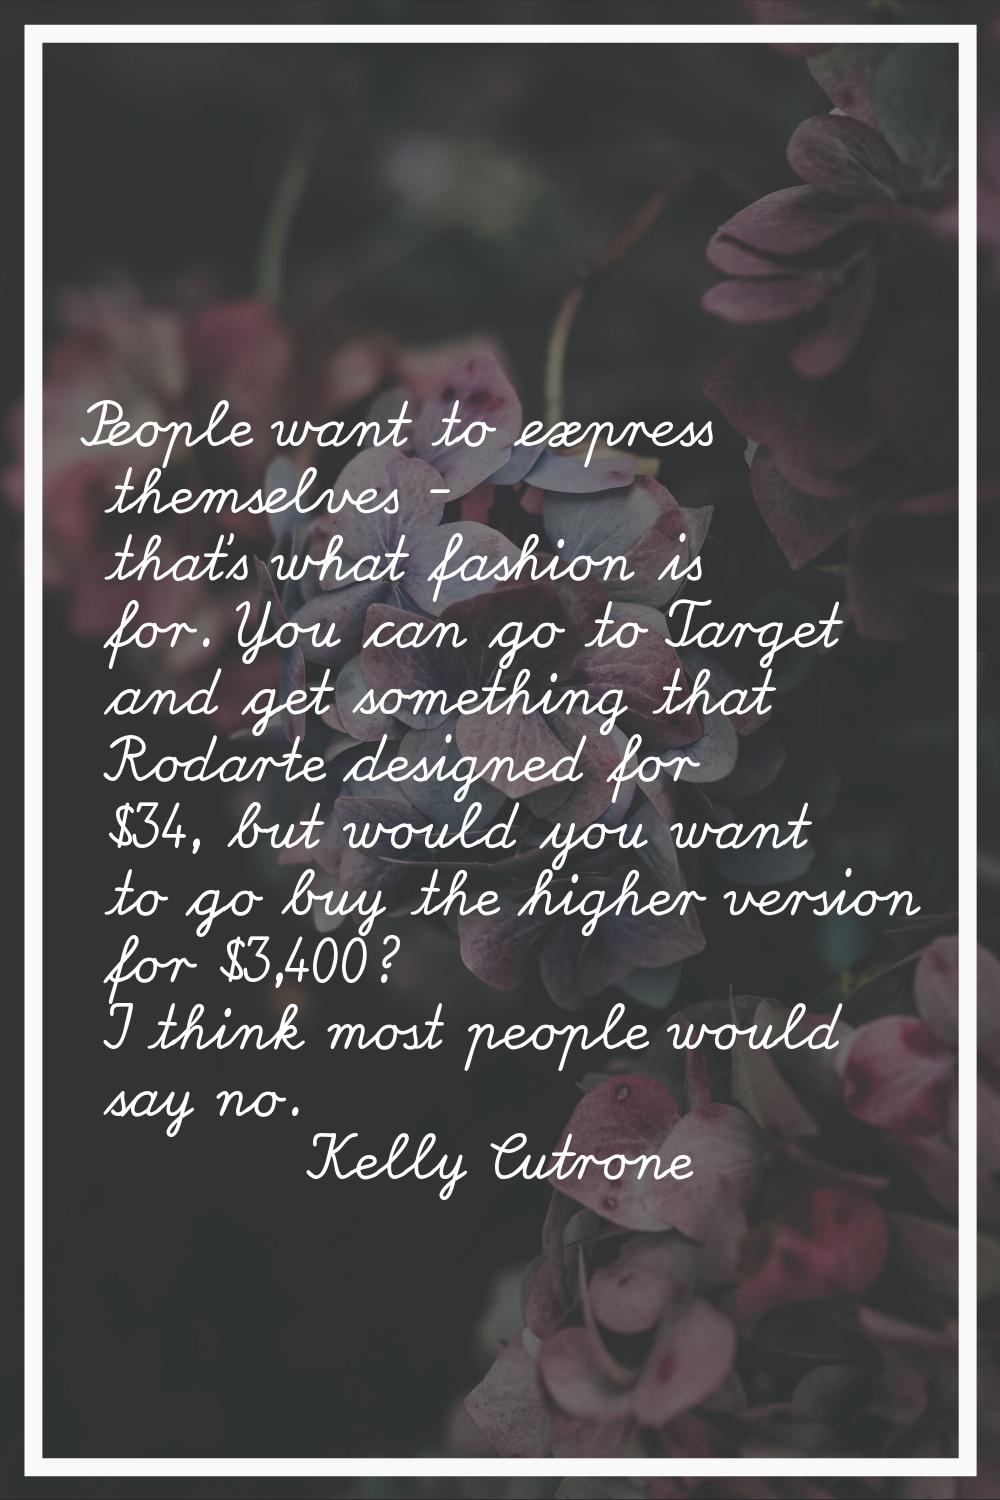 People want to express themselves - that's what fashion is for. You can go to Target and get someth